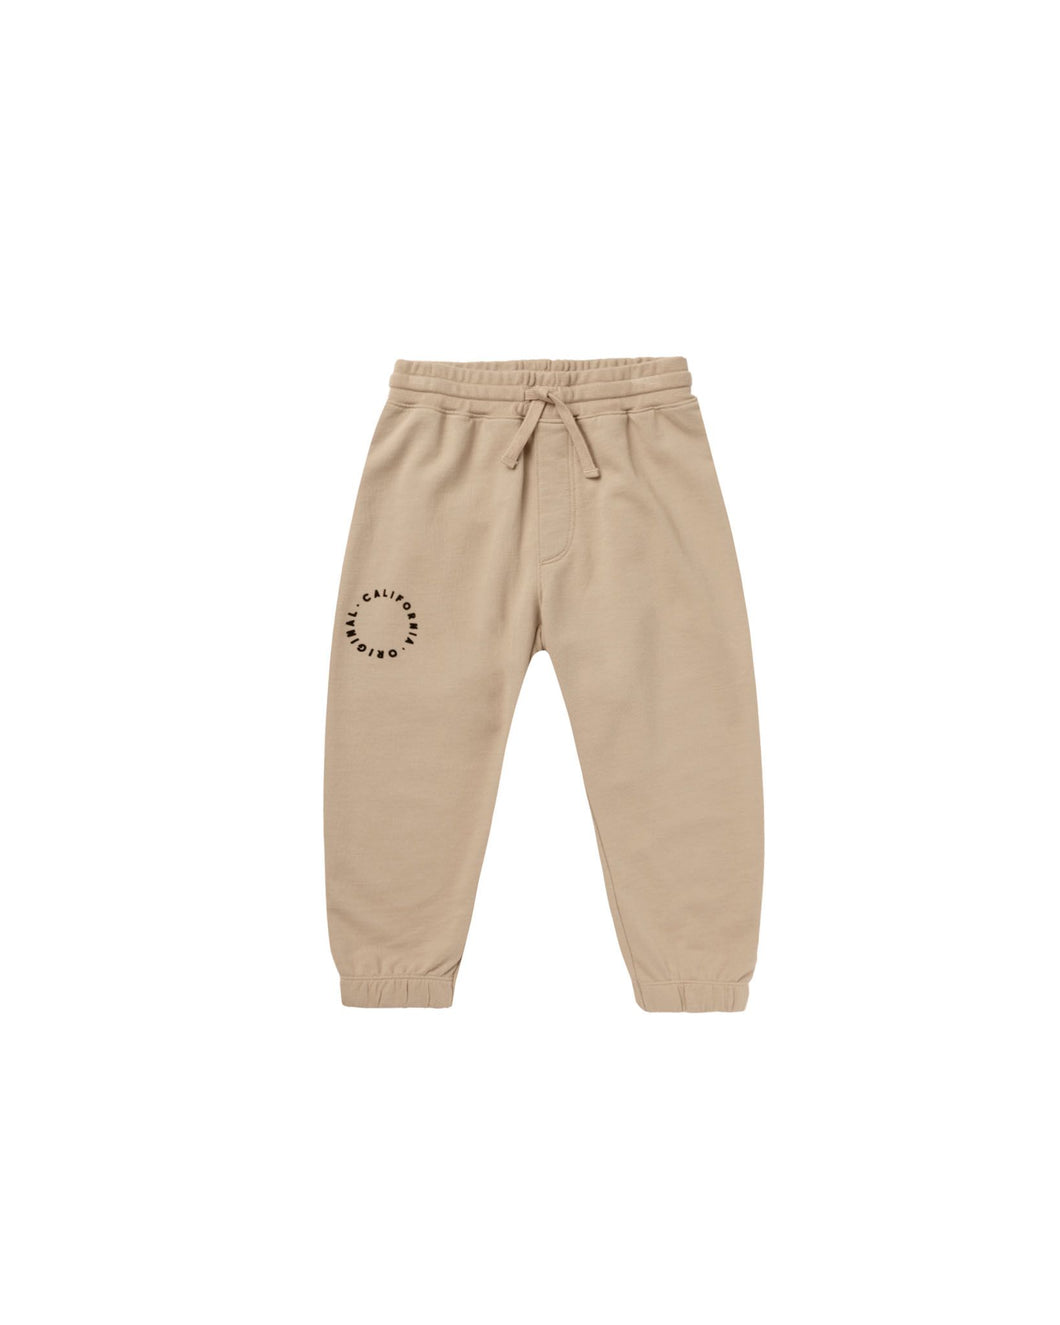 Jogger Pant - Sand SIZE 8/9 YEARS